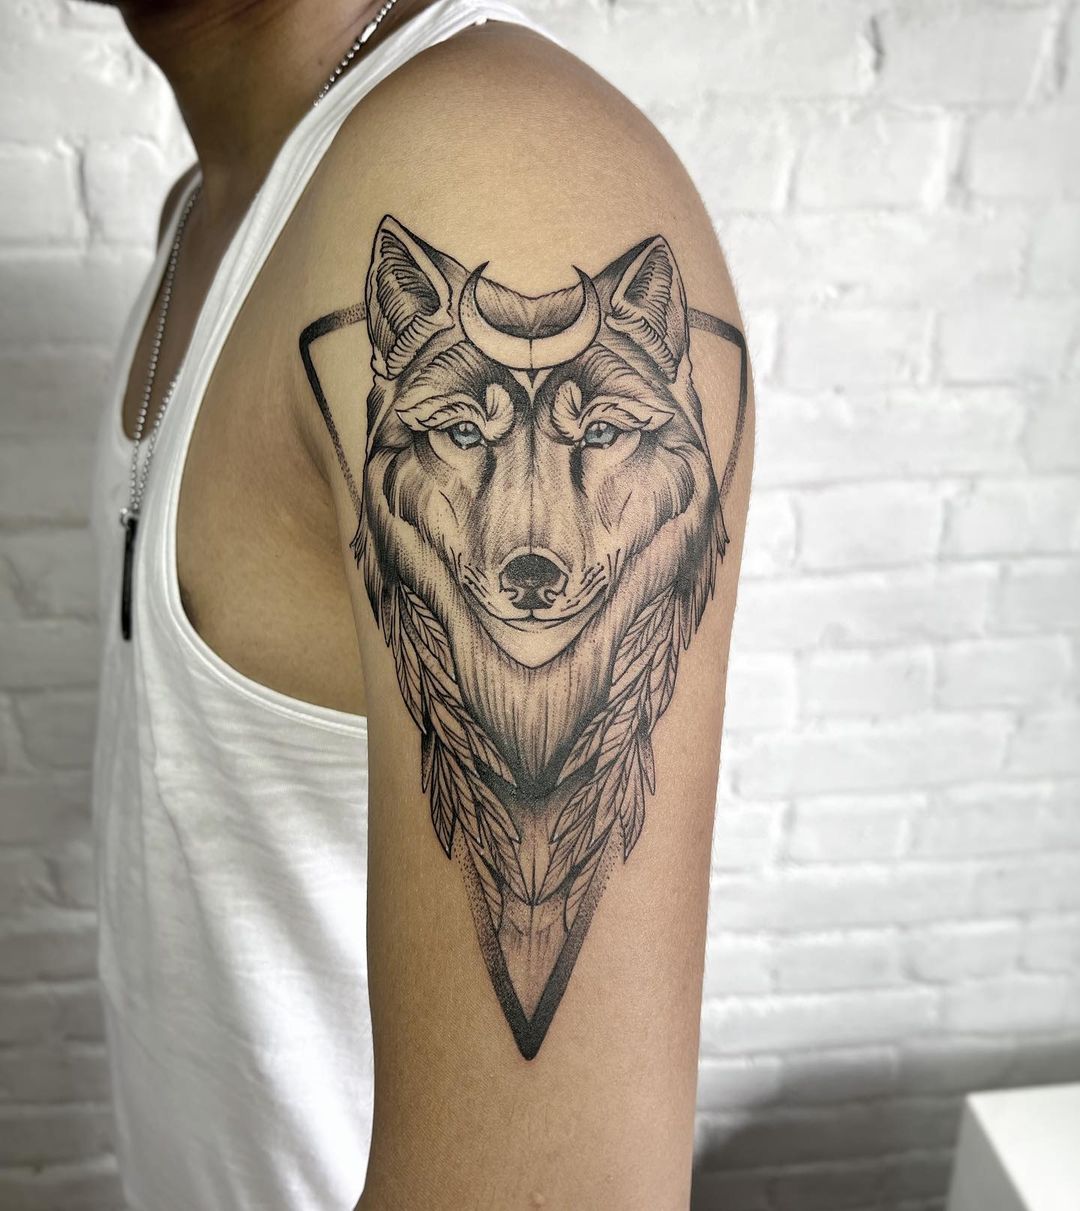 Animal Tattoos: Meaning of a Wolf Tattoo - The Skull and Sword